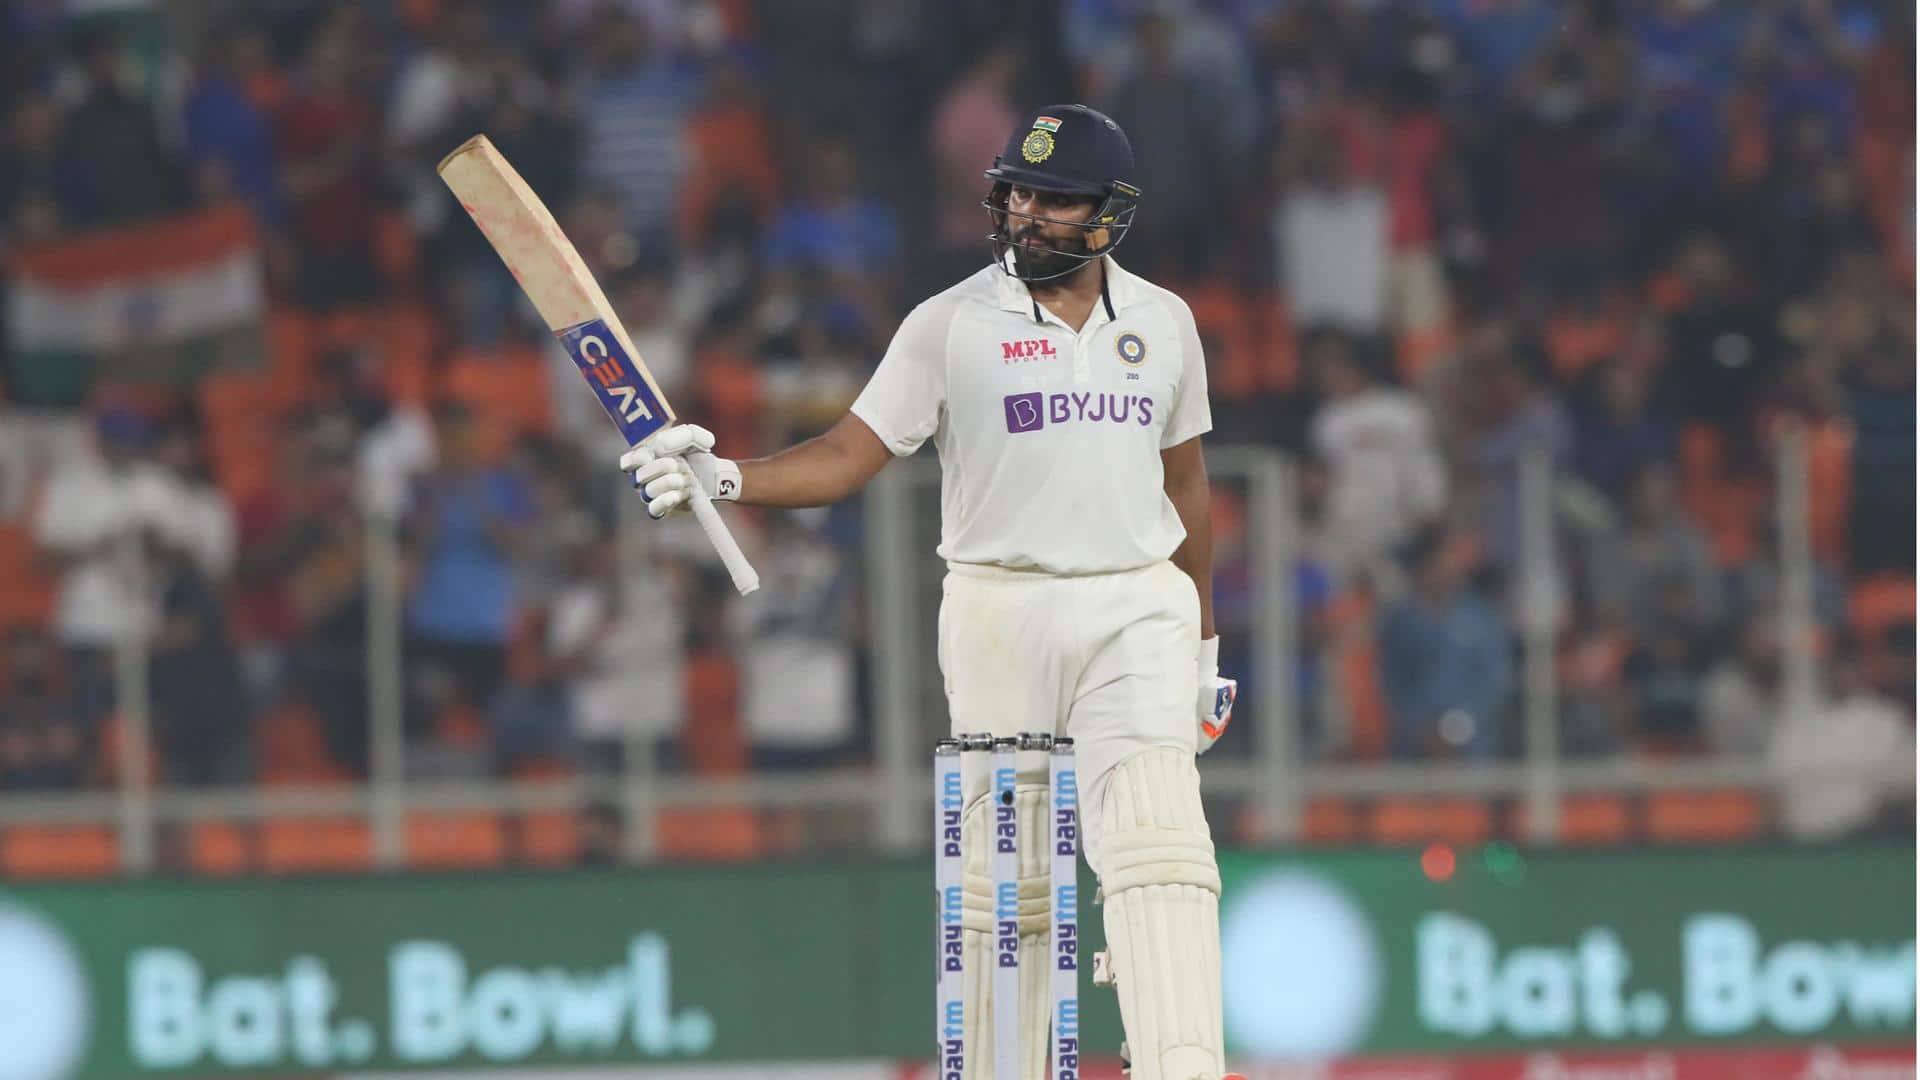 WI vs IND: Decoding Rohit Sharma's Test stats as opener